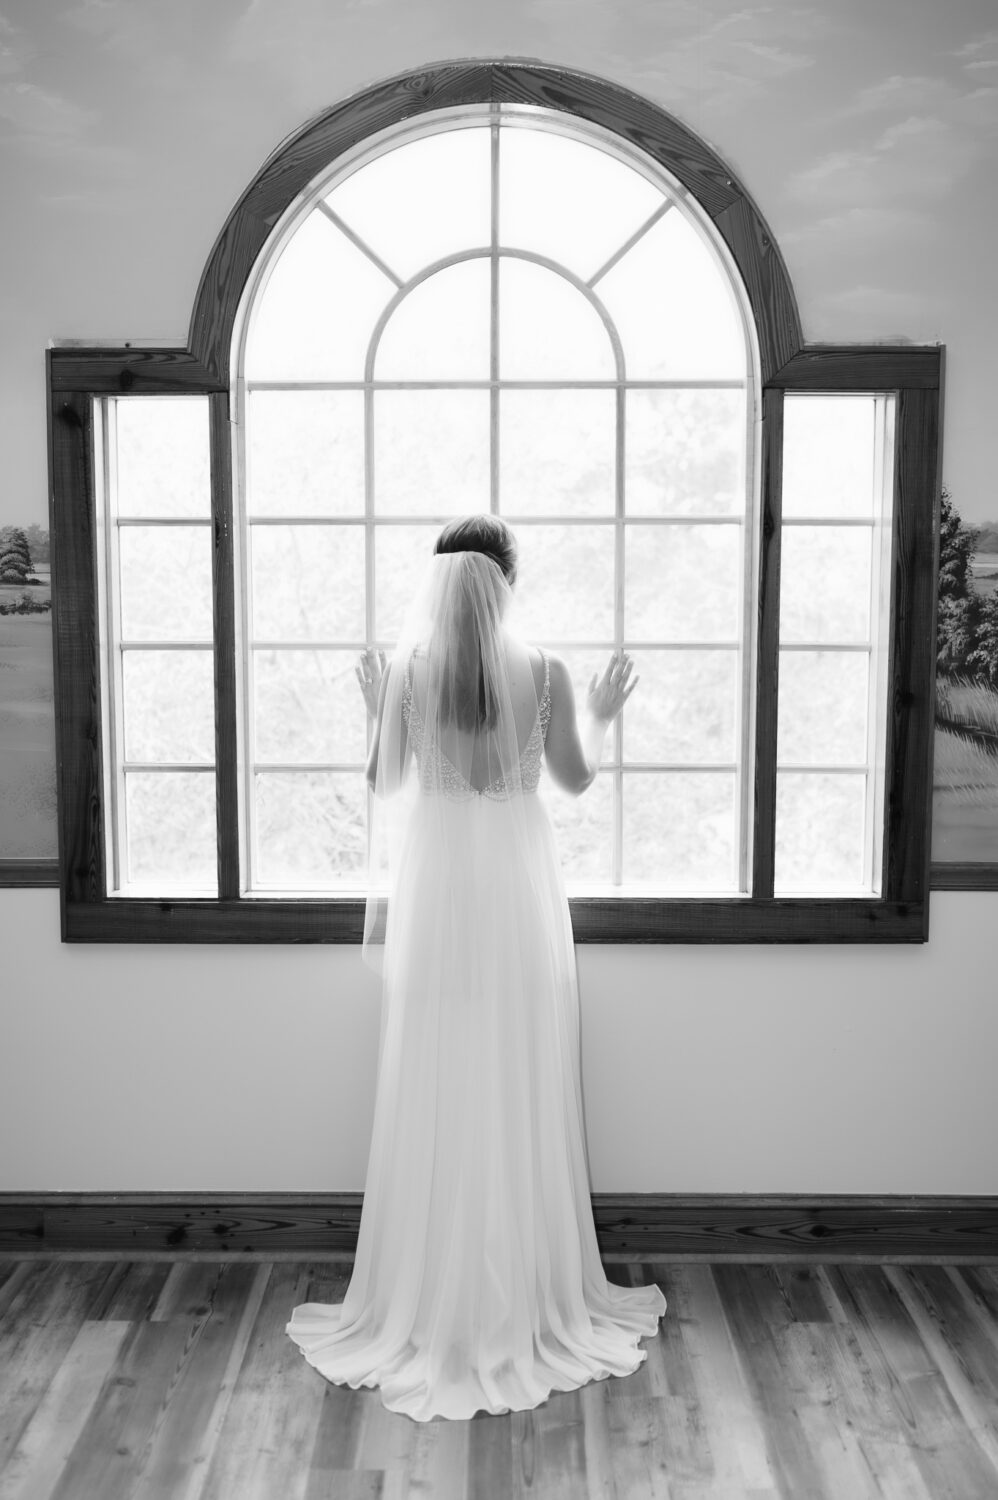 Bride looking out the window - Caledonia Golf & Fish Club